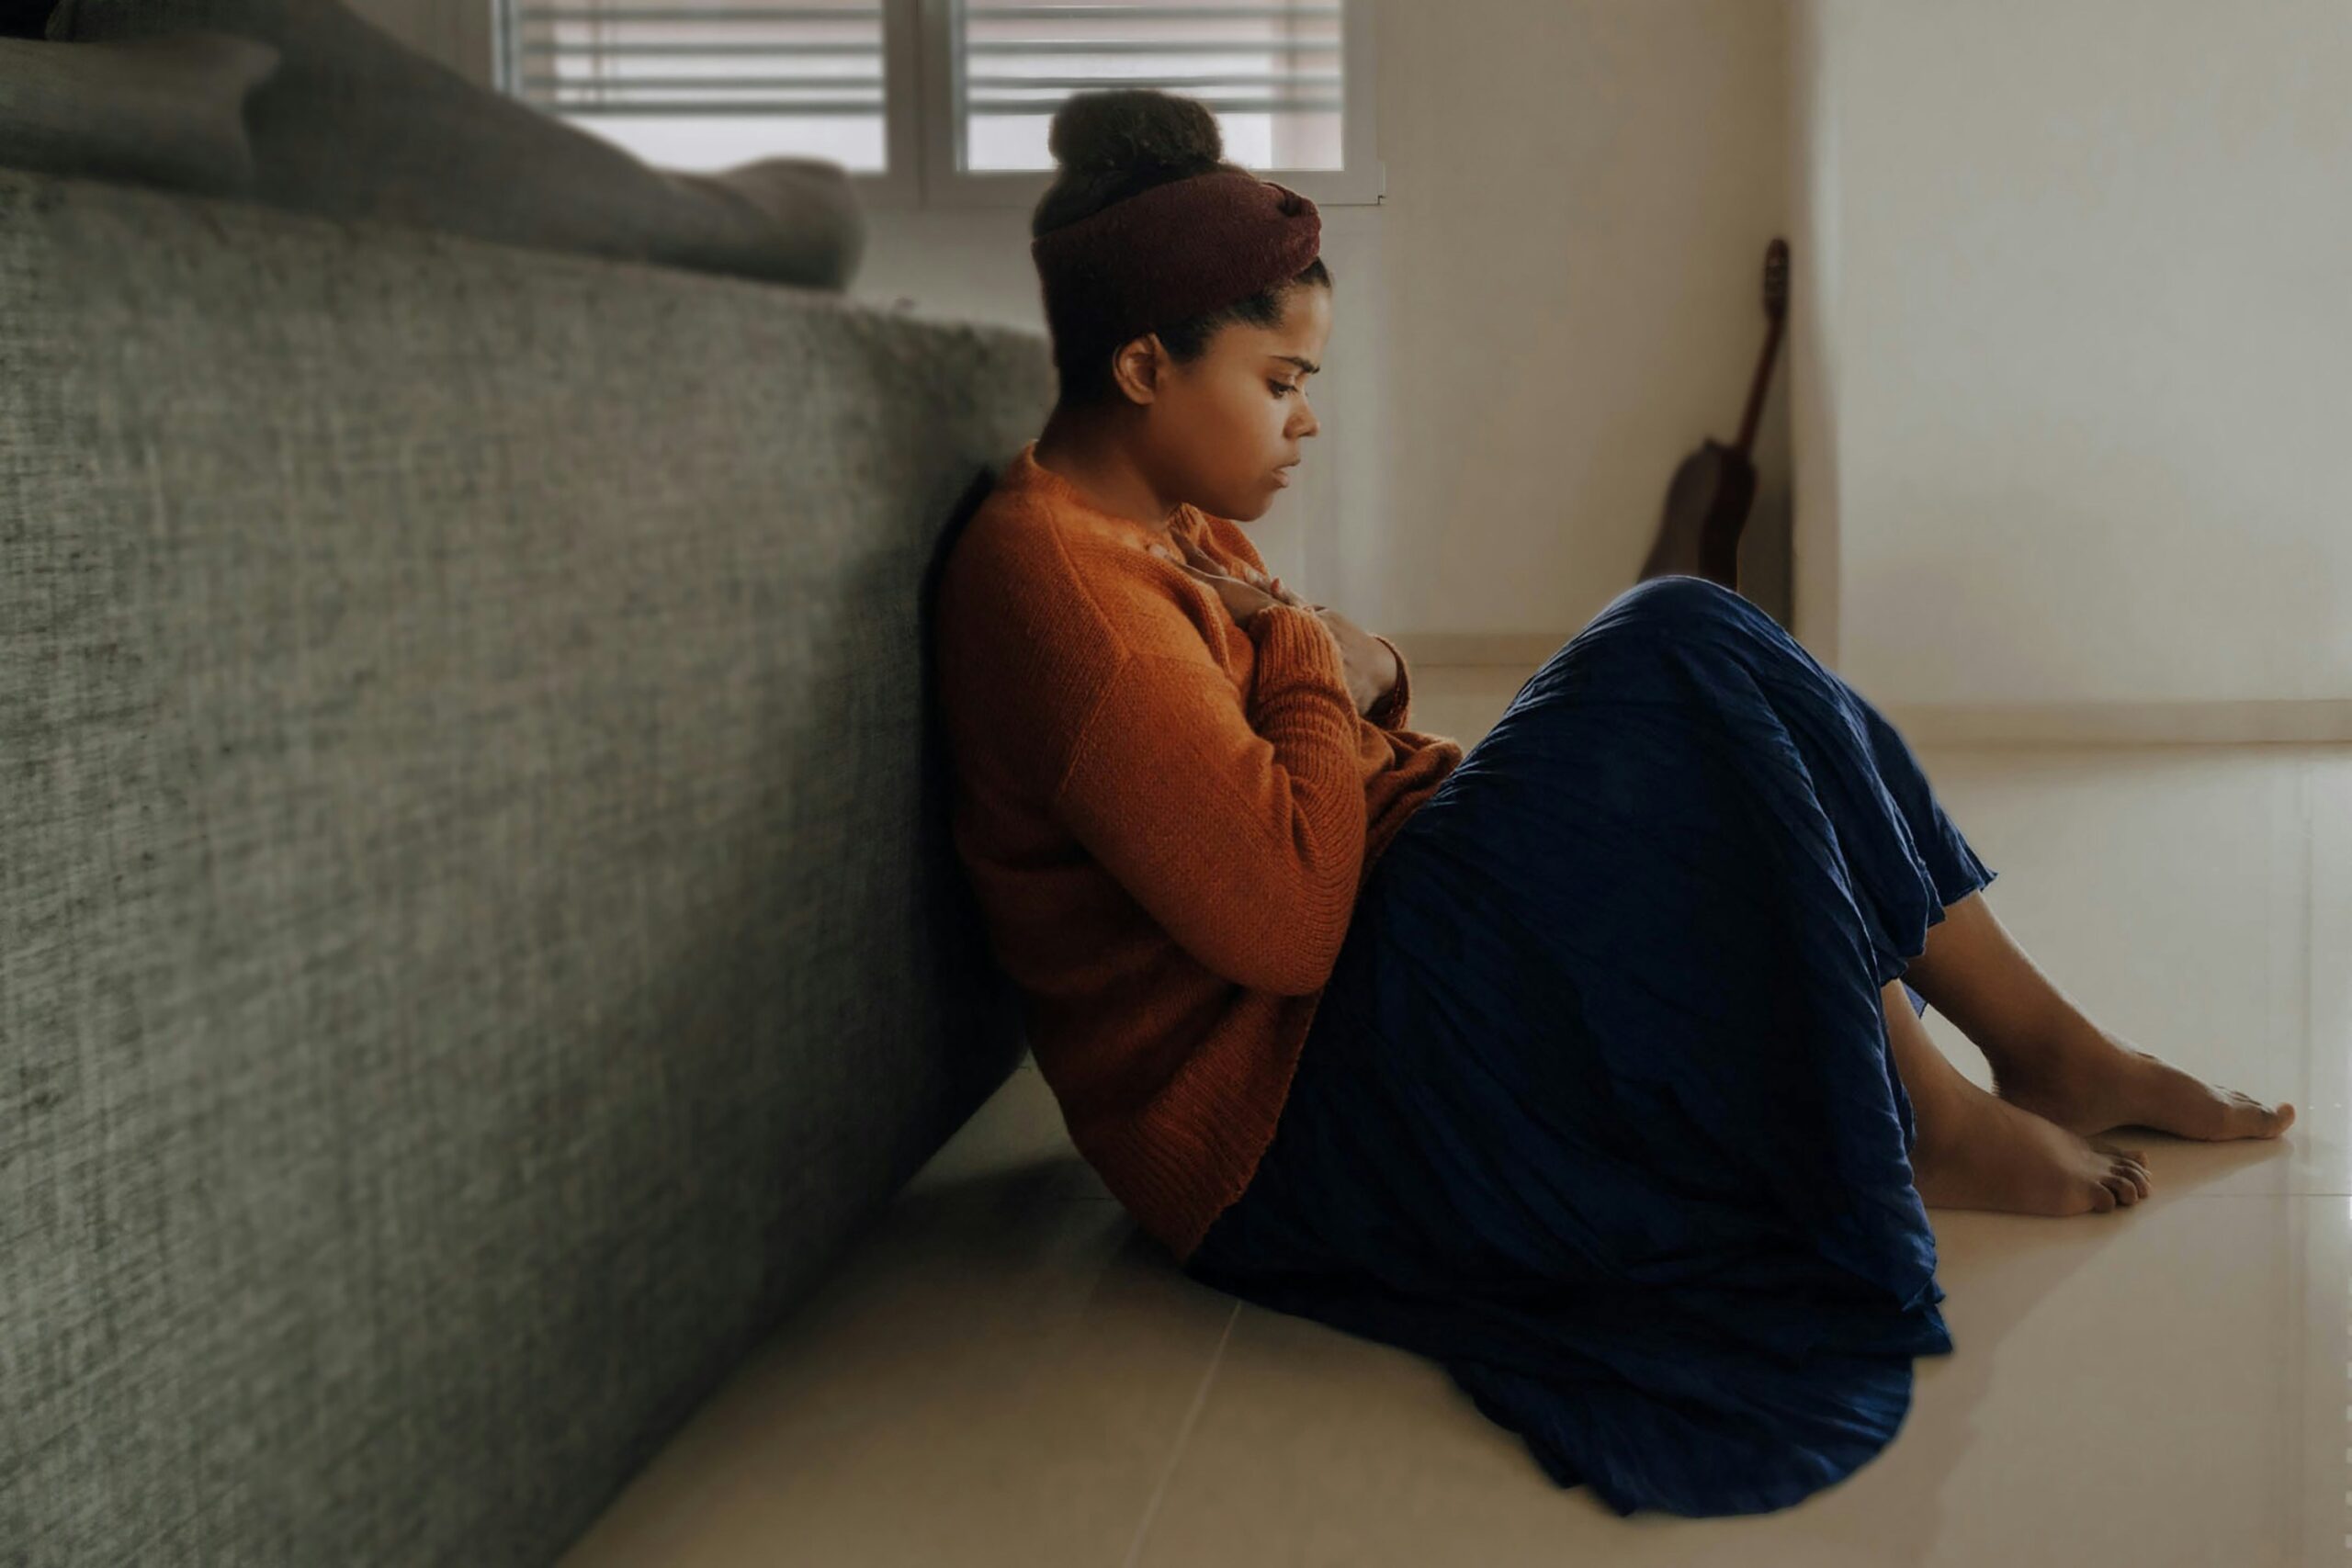 A person sitting on the floor, leaning against a couch, appears contemplative, embodying the theme of managing anxiety levels.